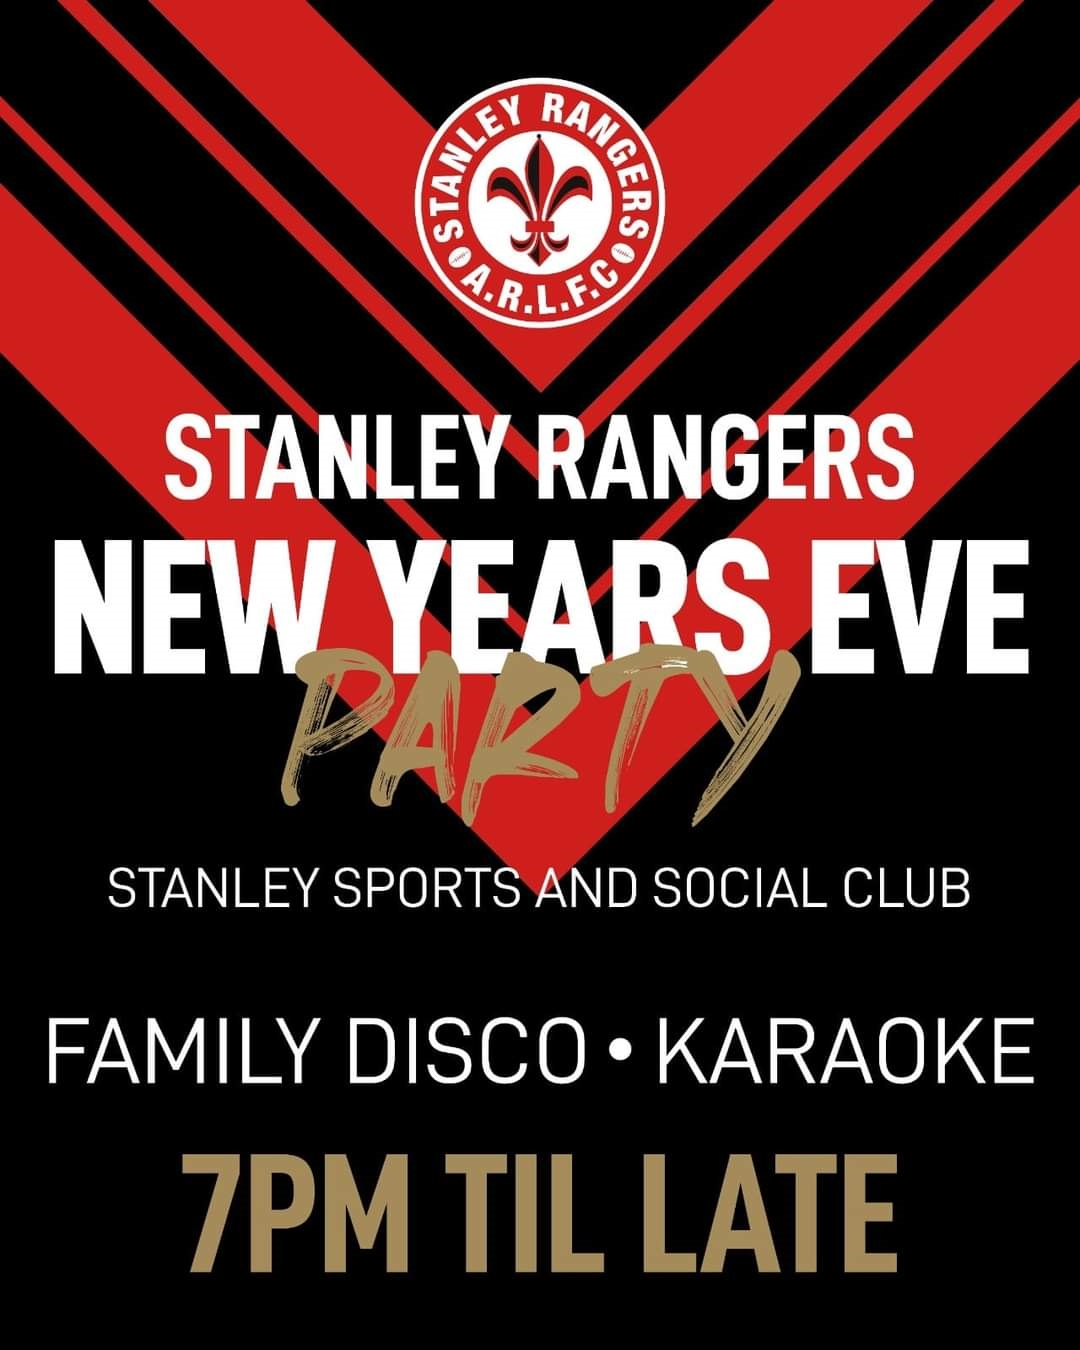 Stanley Rangers New Year's Eve Party